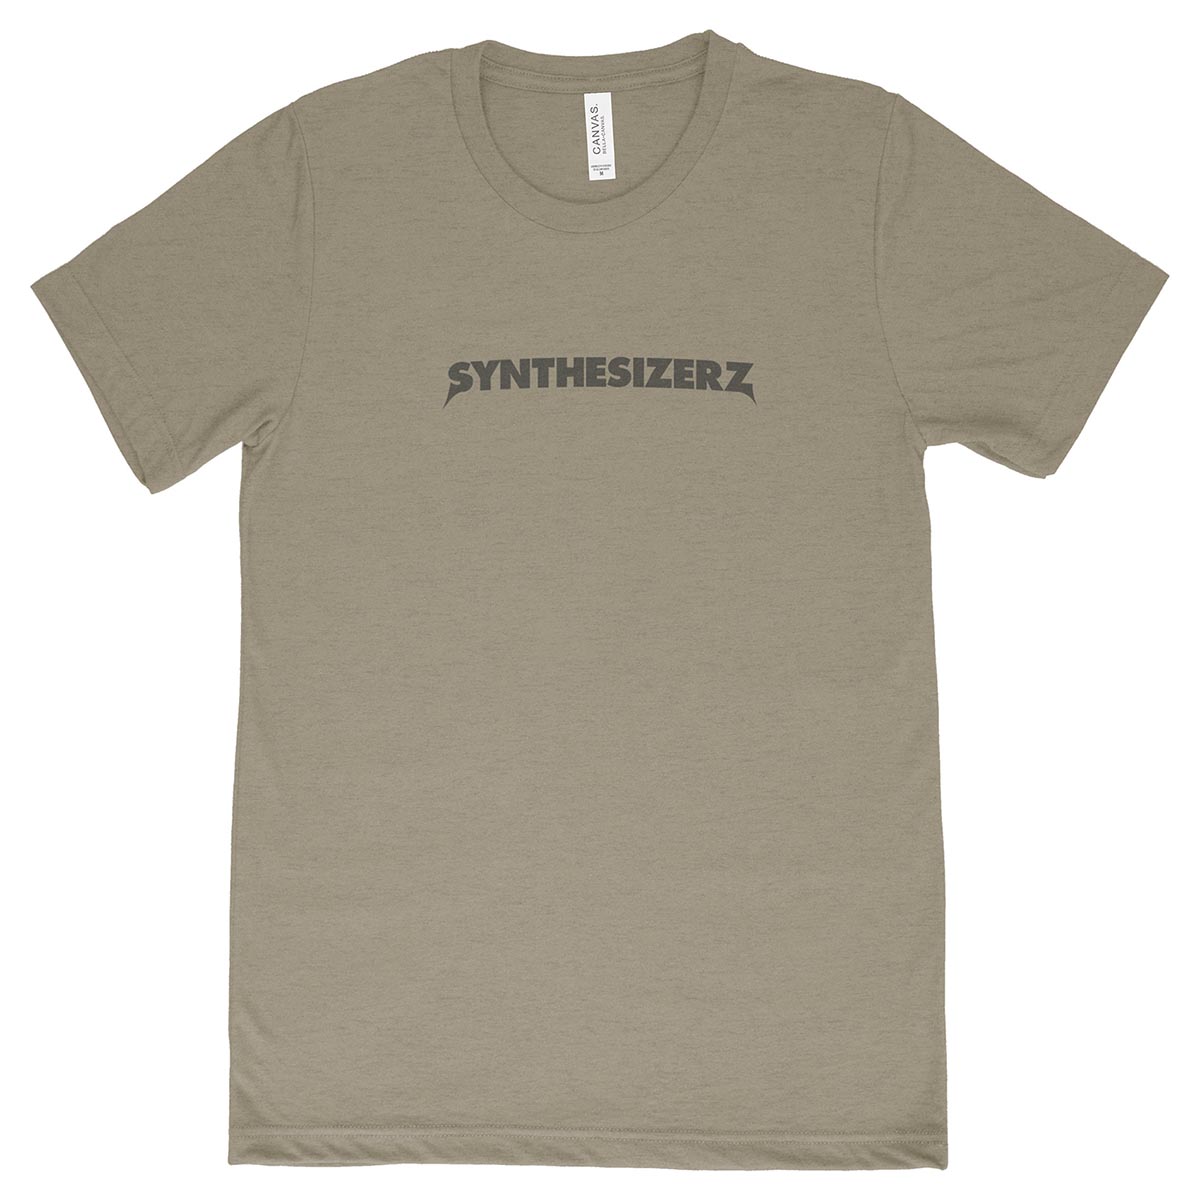 The Synthesizerz Tee